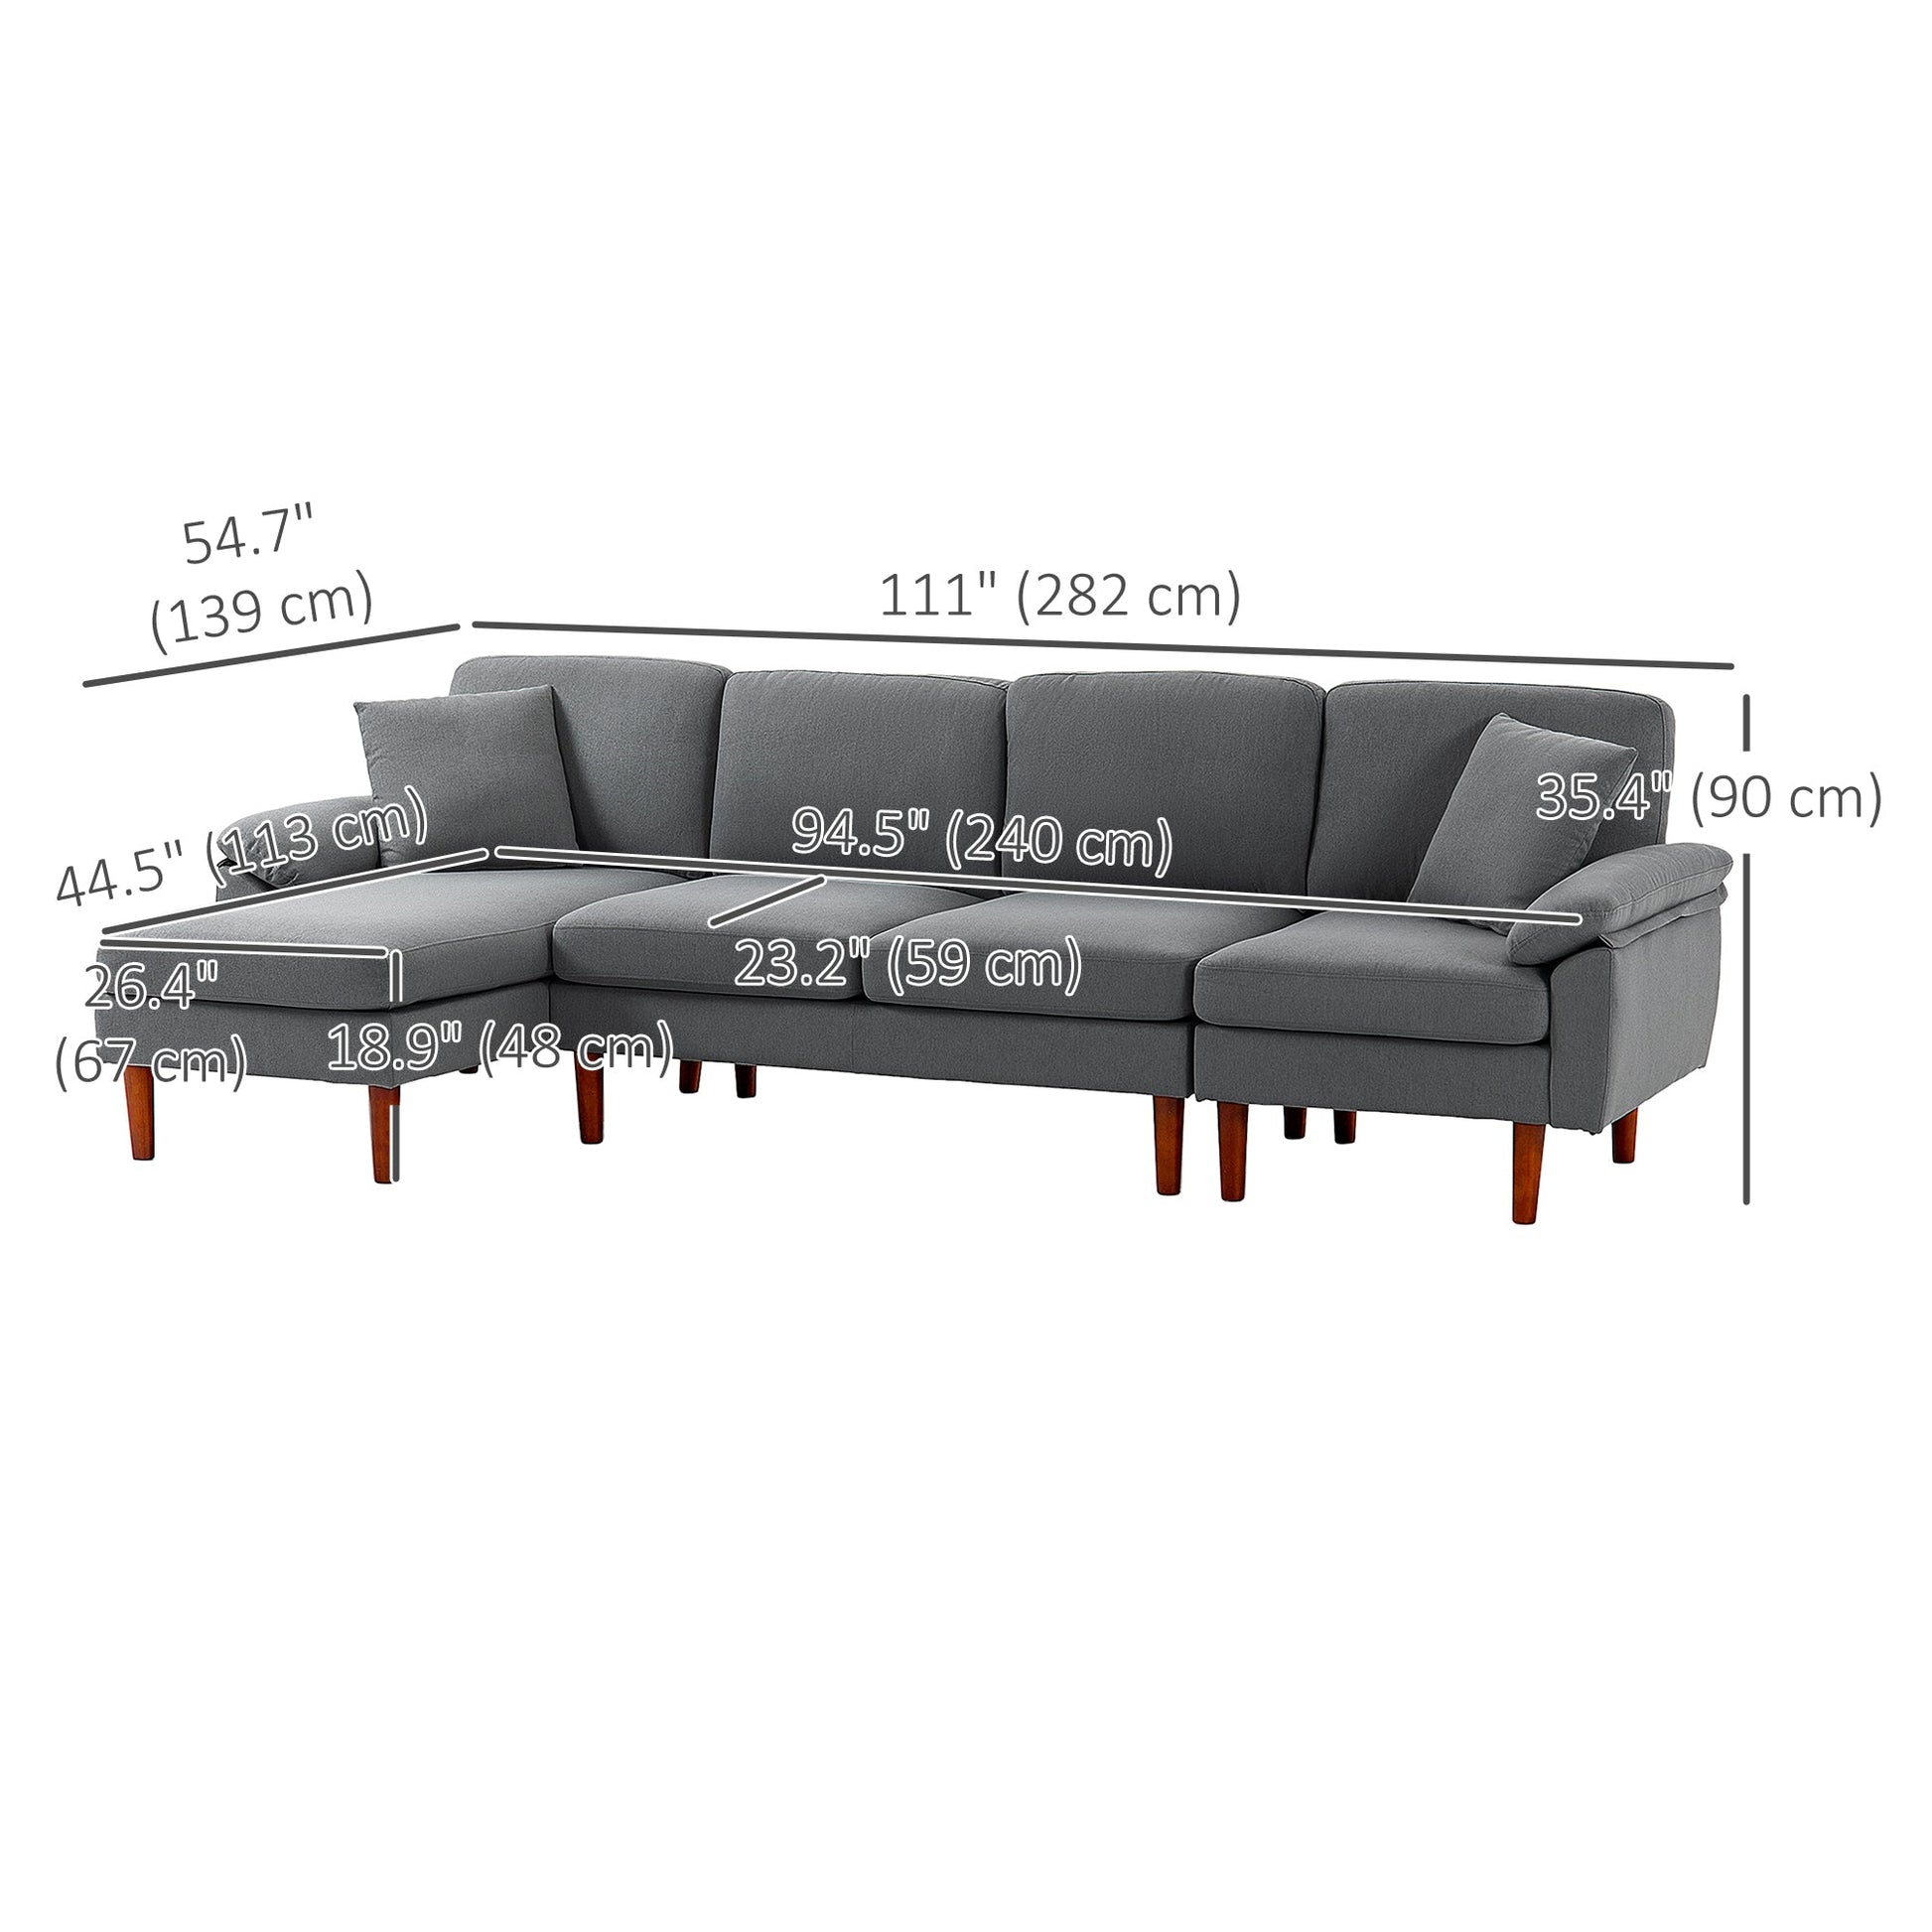 L-Shape Sofa, Modern Sectional Couch with Reversible Chaise Lounge, Pillows and Wooden Legs for Living Room, Dark Grey - Gallery Canada